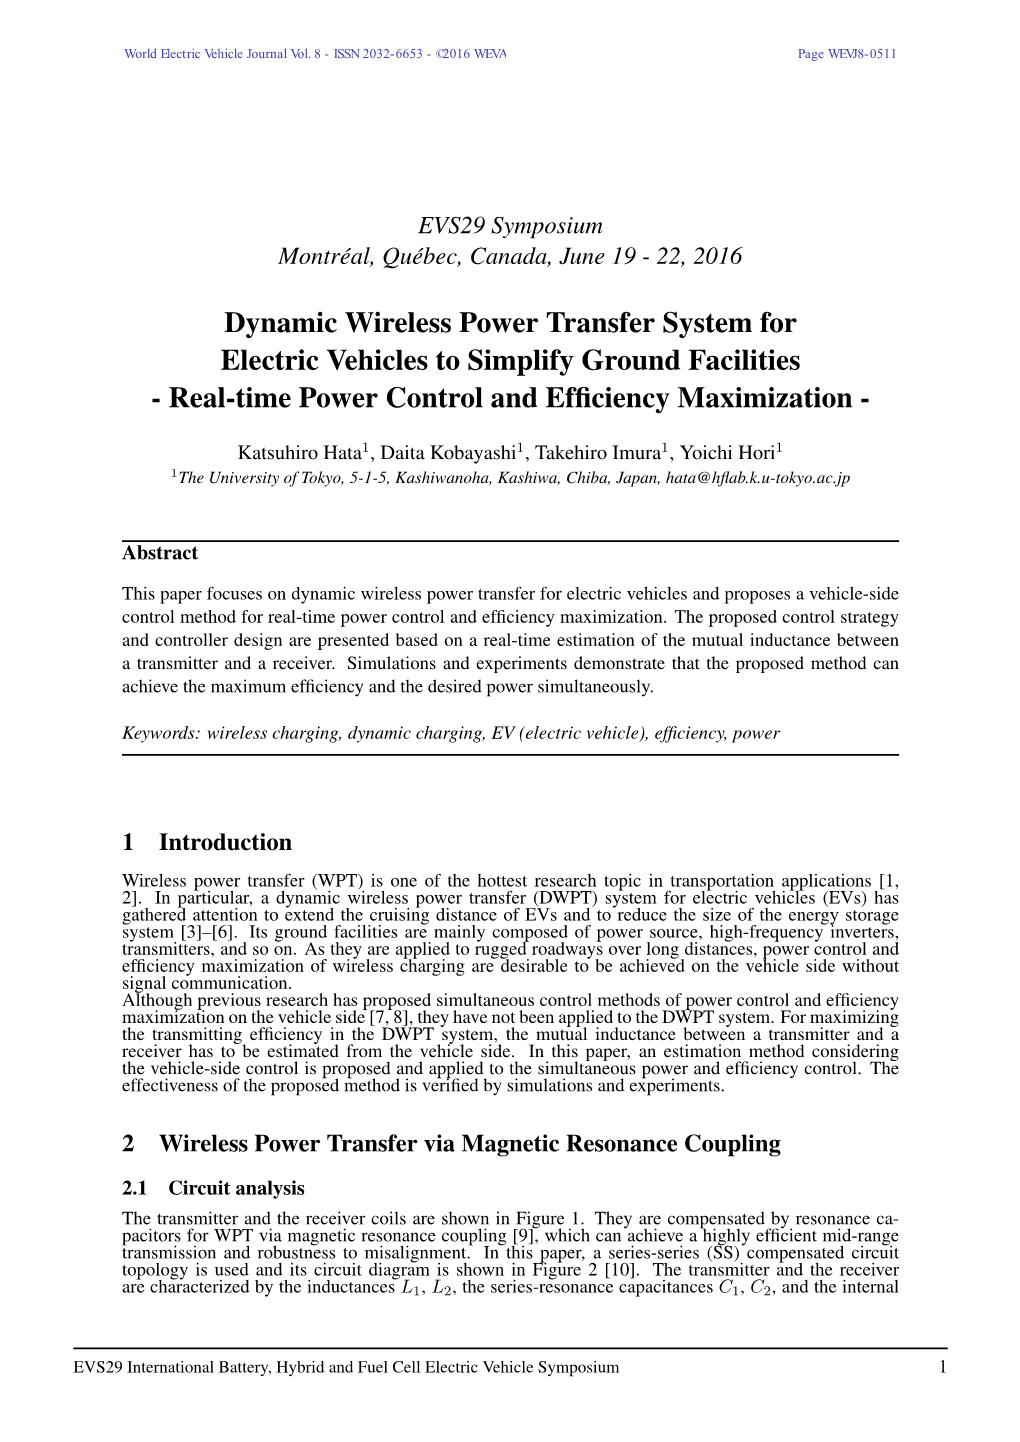 Dynamic Wireless Power Transfer System for Electric Vehicles to Simplify Ground Facilities - Real-Time Power Control and Efﬁciency Maximization